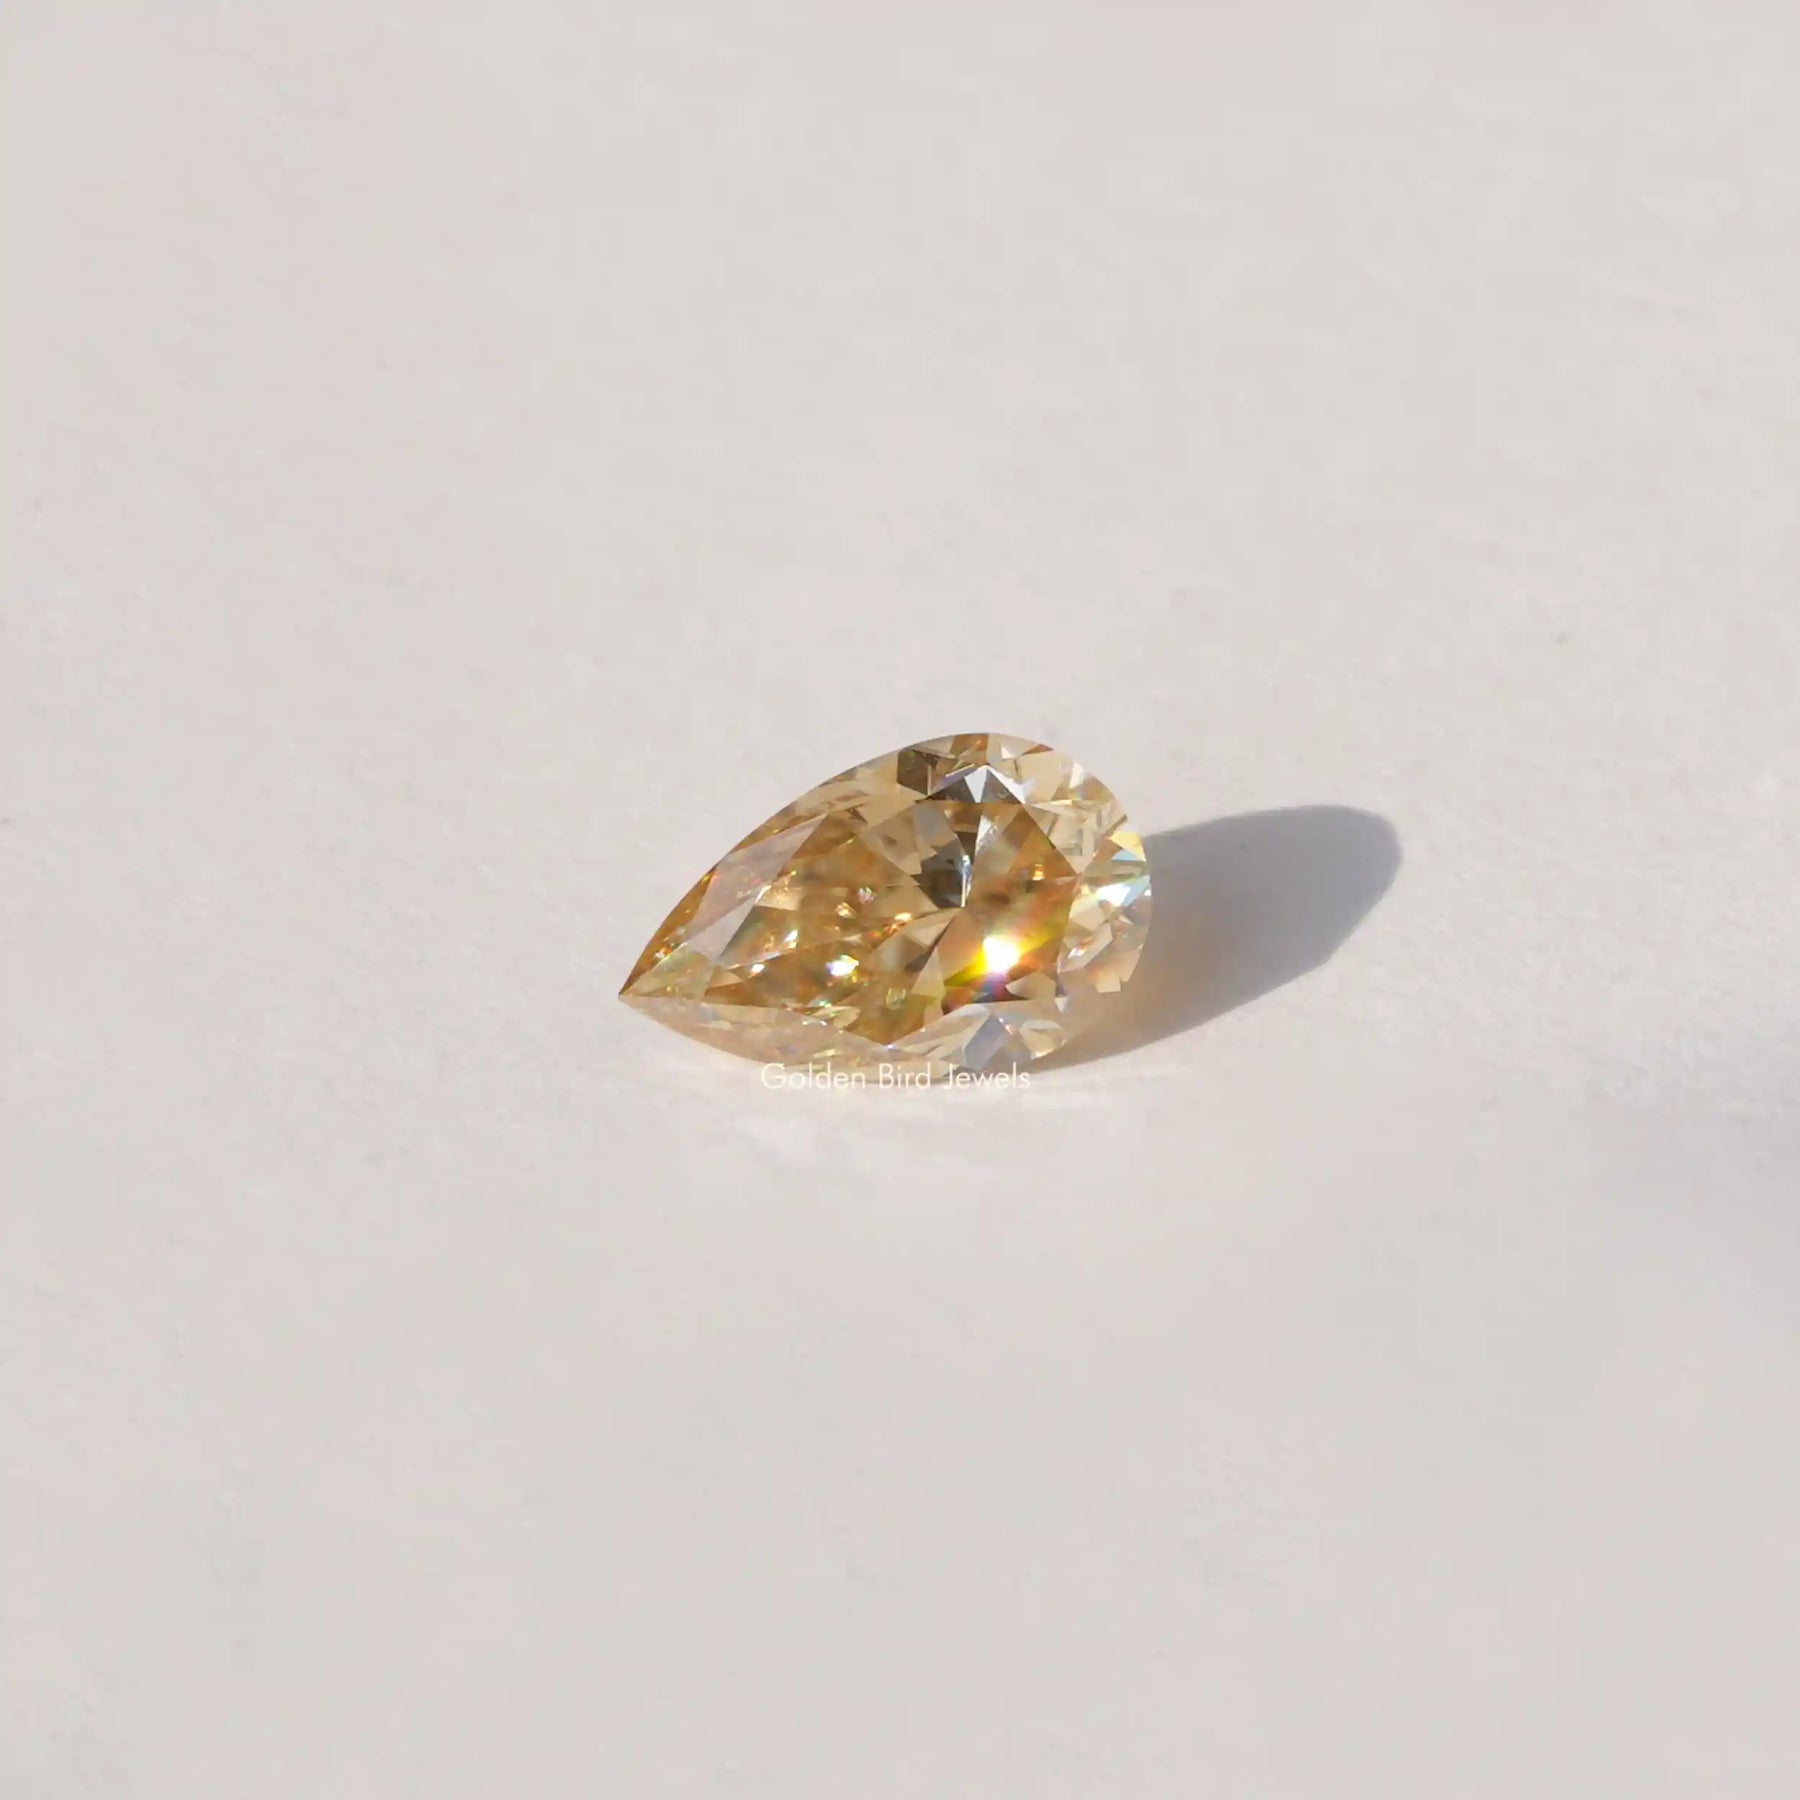 [Side view of old mine pear cut loose stone]-[Golden Bird Jewels]